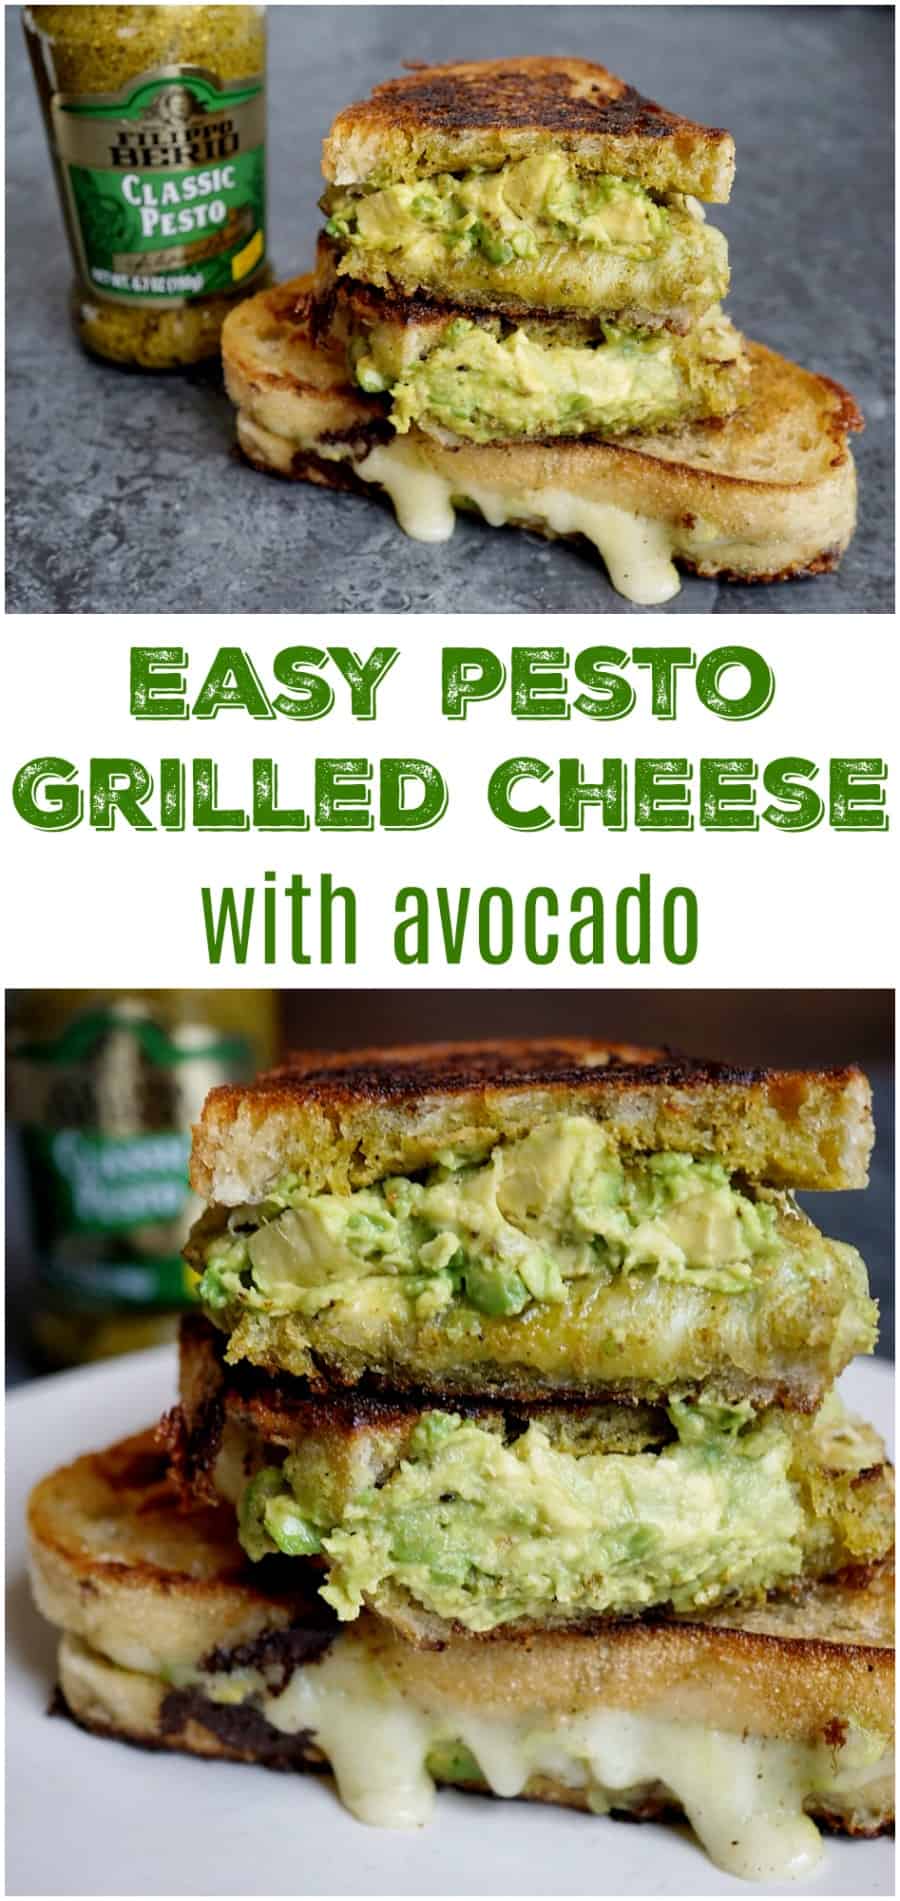 This Pesto Grilled Cheese is made with Filippo Berio Classic Pesto and stuffed with fresh avocado. It's a quick and easy weeknight dinner and sure to be a new favorite in your home.